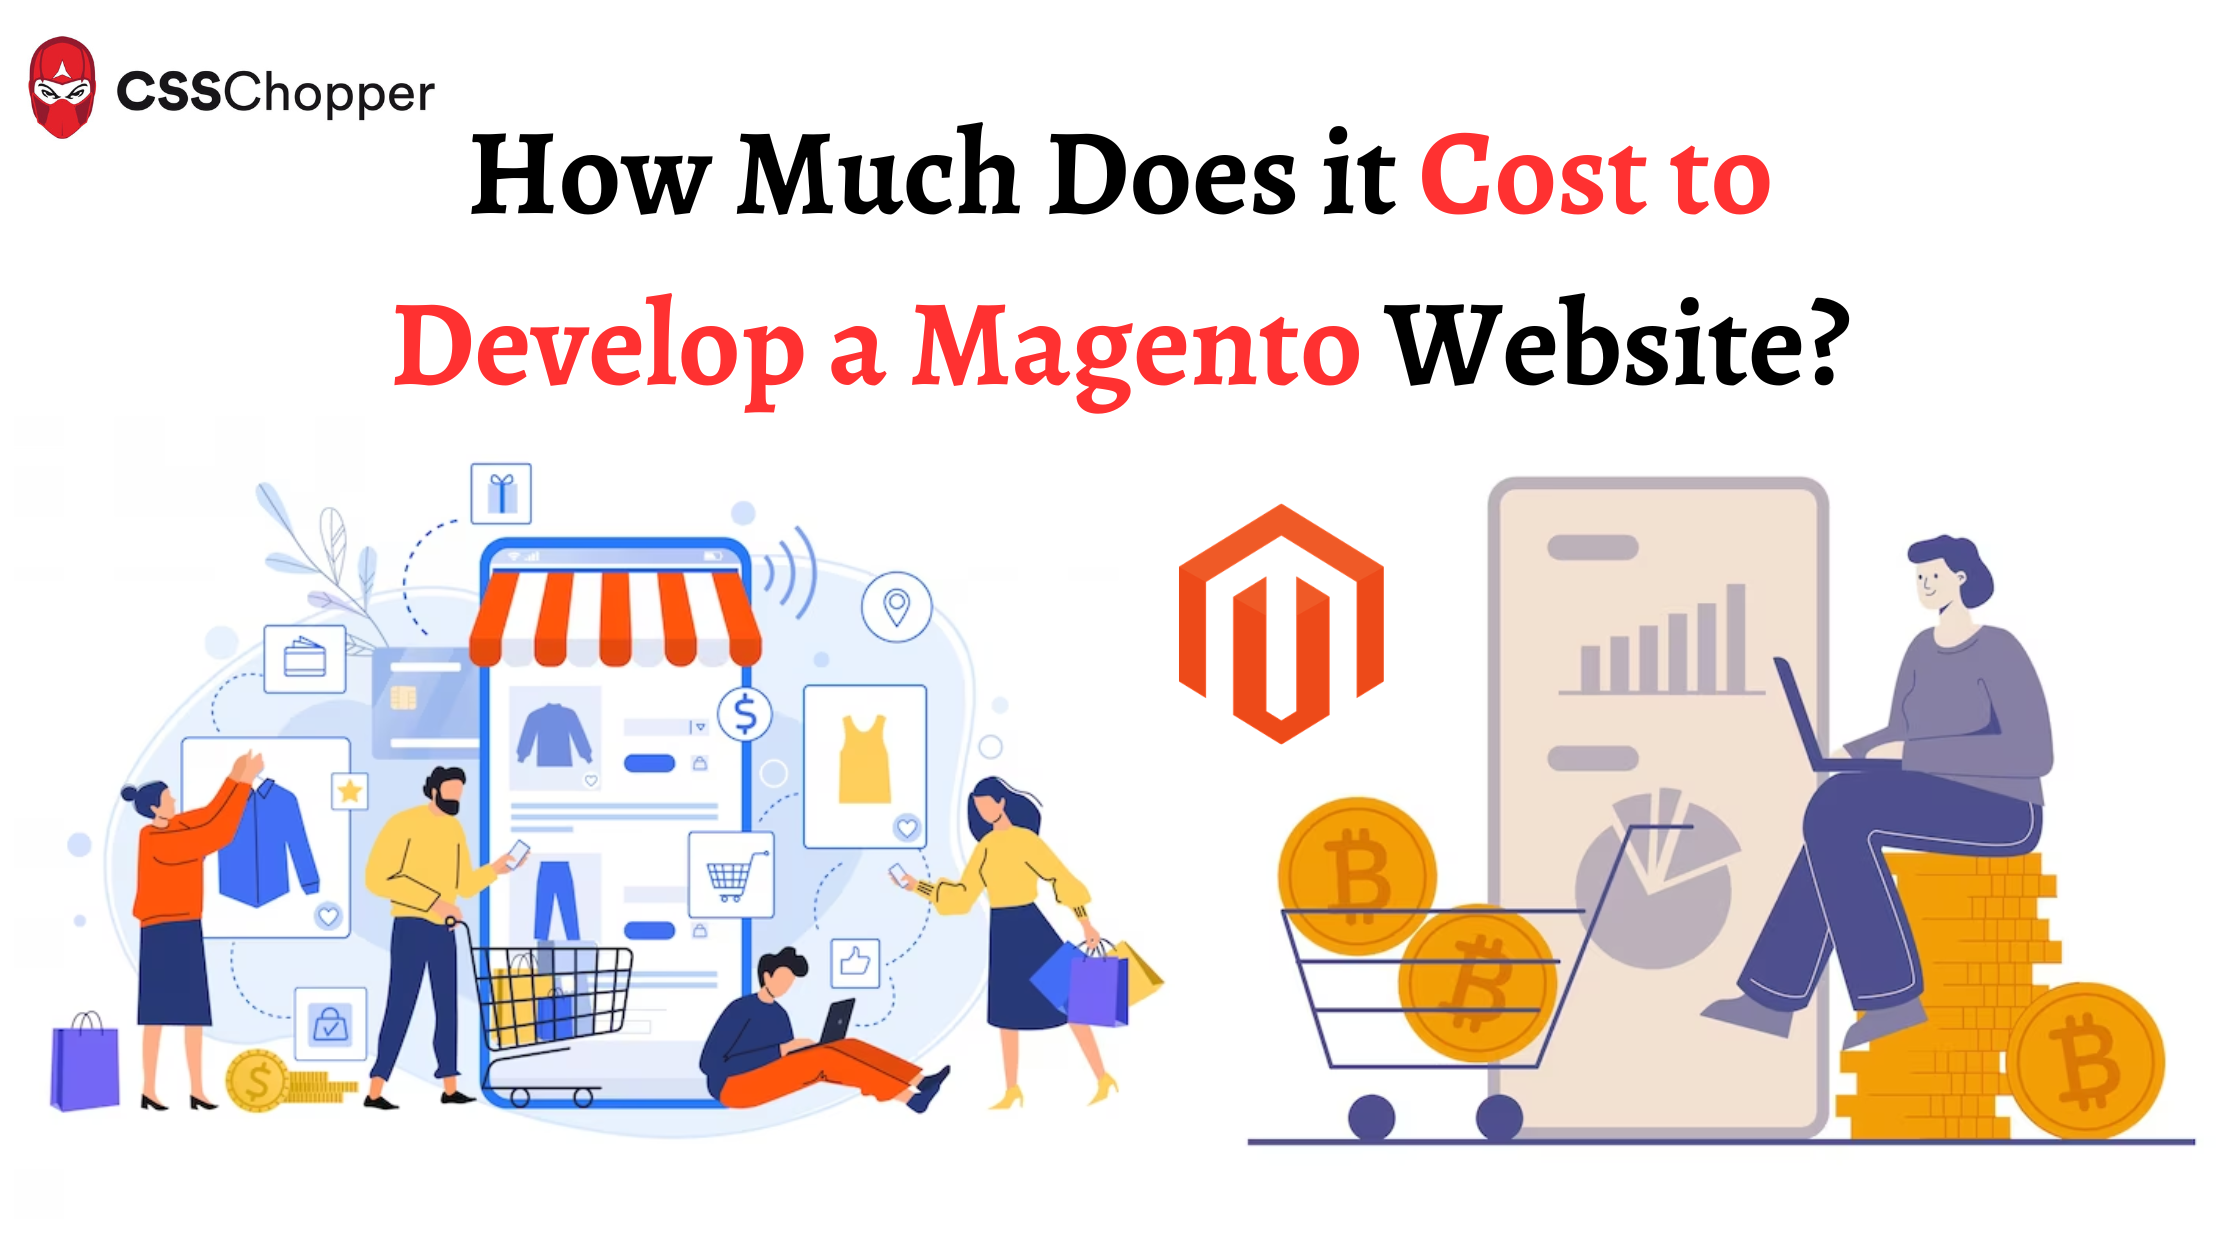 How Much Does it Cost to Develop a Magento Website